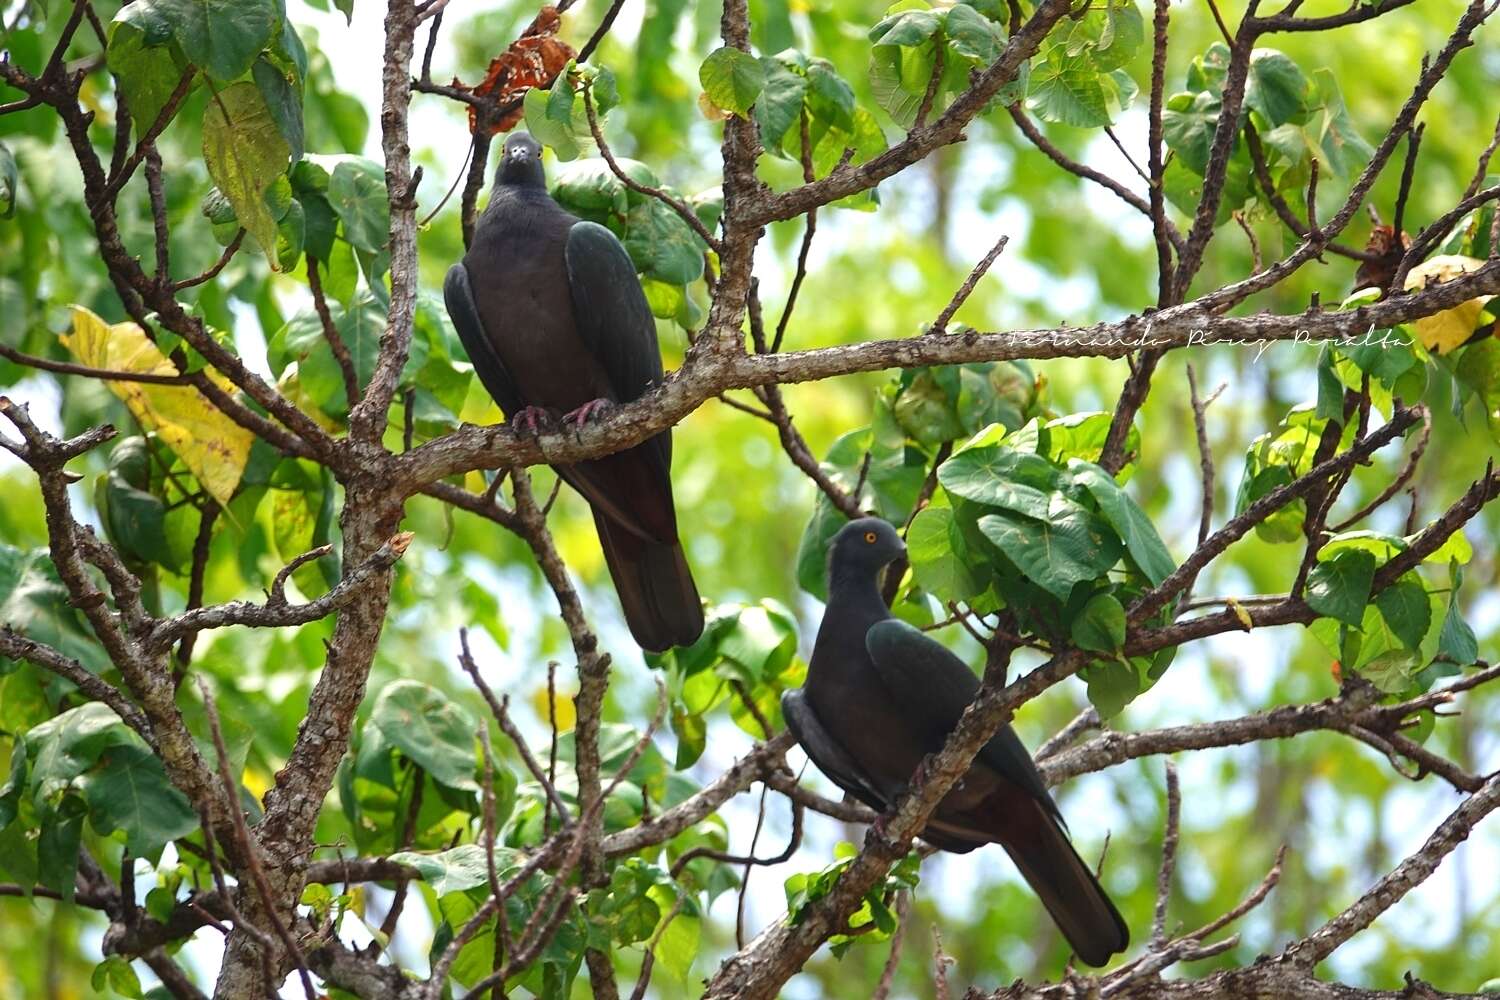 Image of Christmas Imperial Pigeon